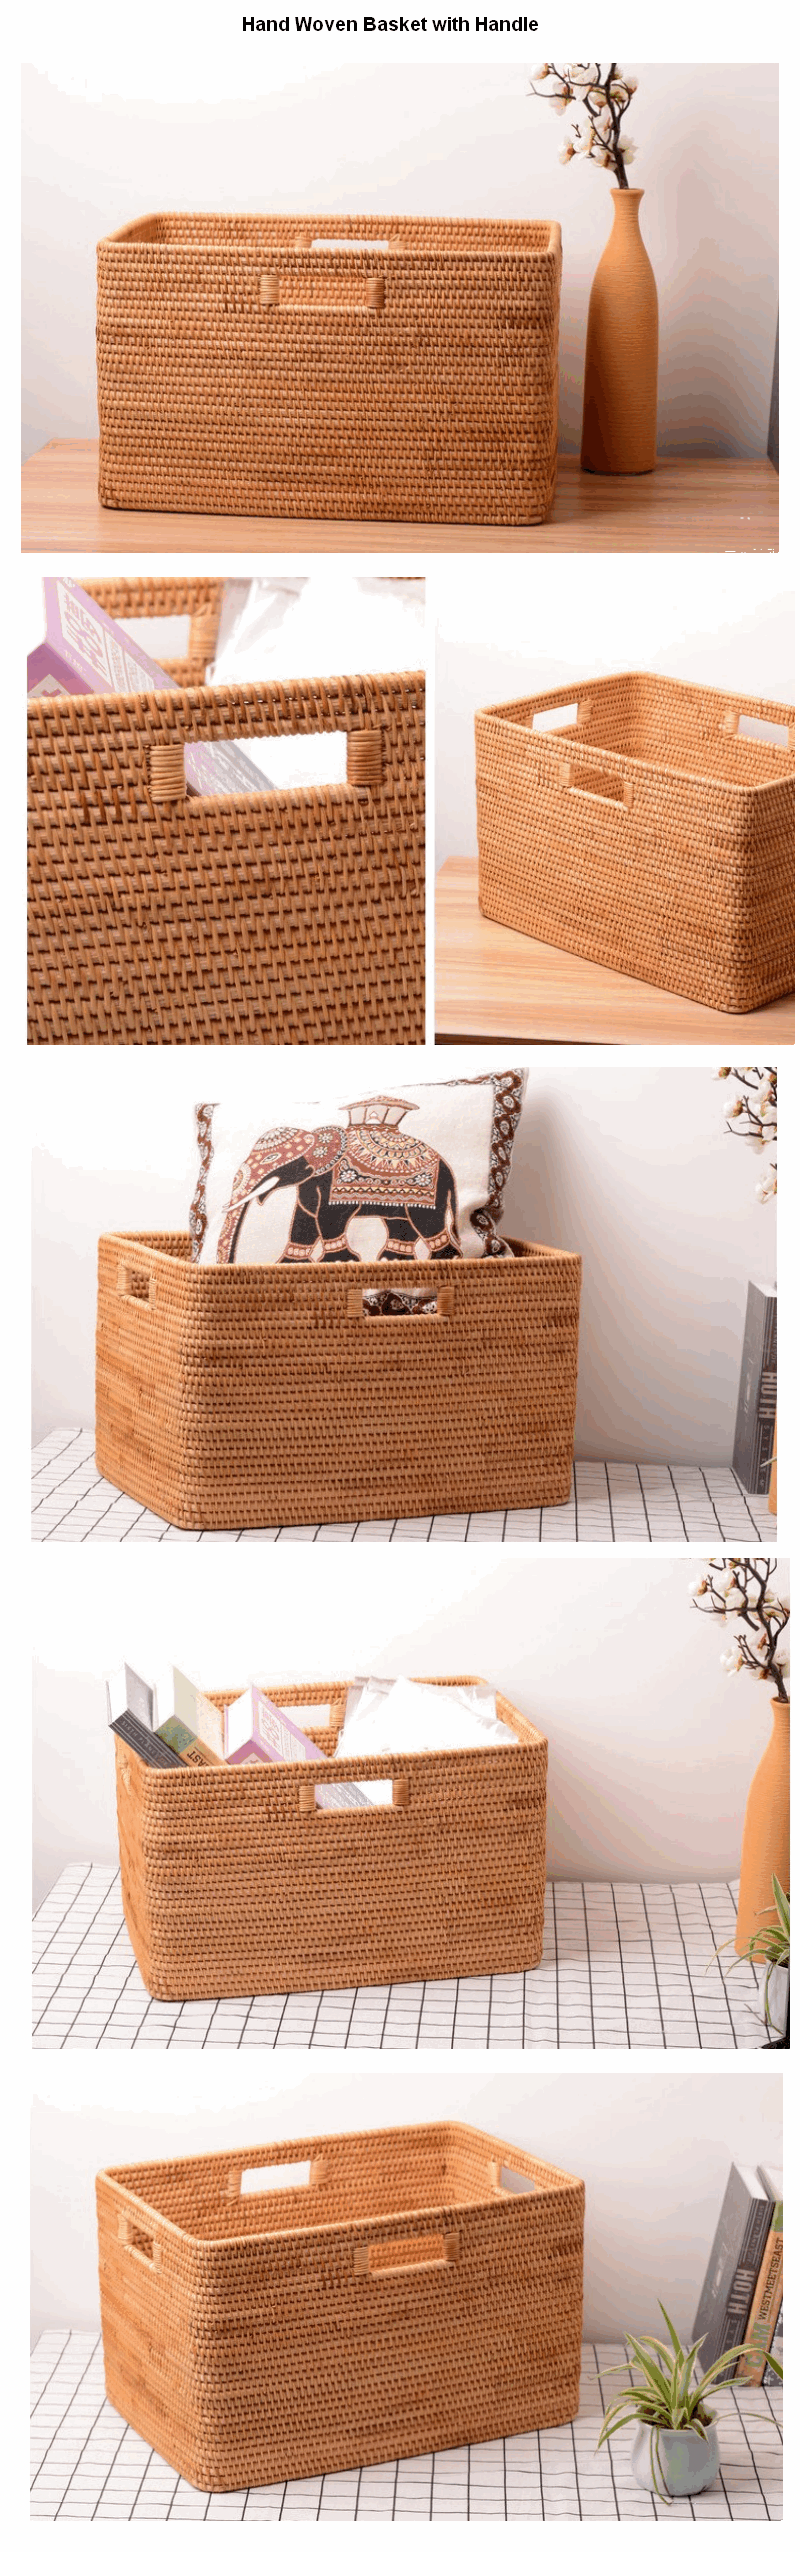 Large Hand Woven Storage Basket with Handle, Large Woven Vietnam Basket